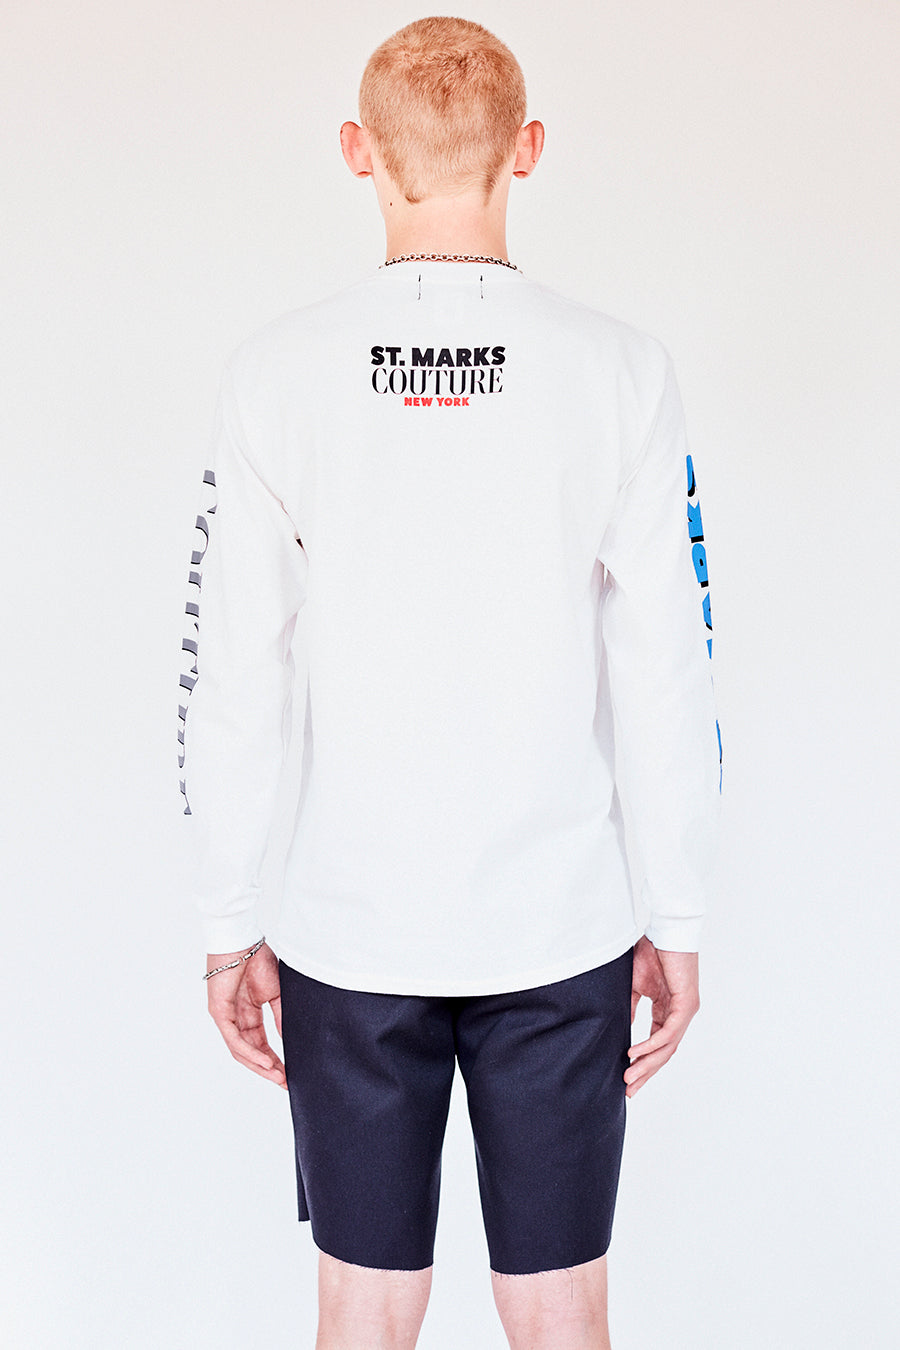 Brand New from New York City: Stmarksnewyork.com. Shop The St. Marks boombox white long sleeve T-shirt: featuring our image from St Marks Place, and the St. Marks Couture New York logo on the back.  Hand silkscreen printed in New York with love.